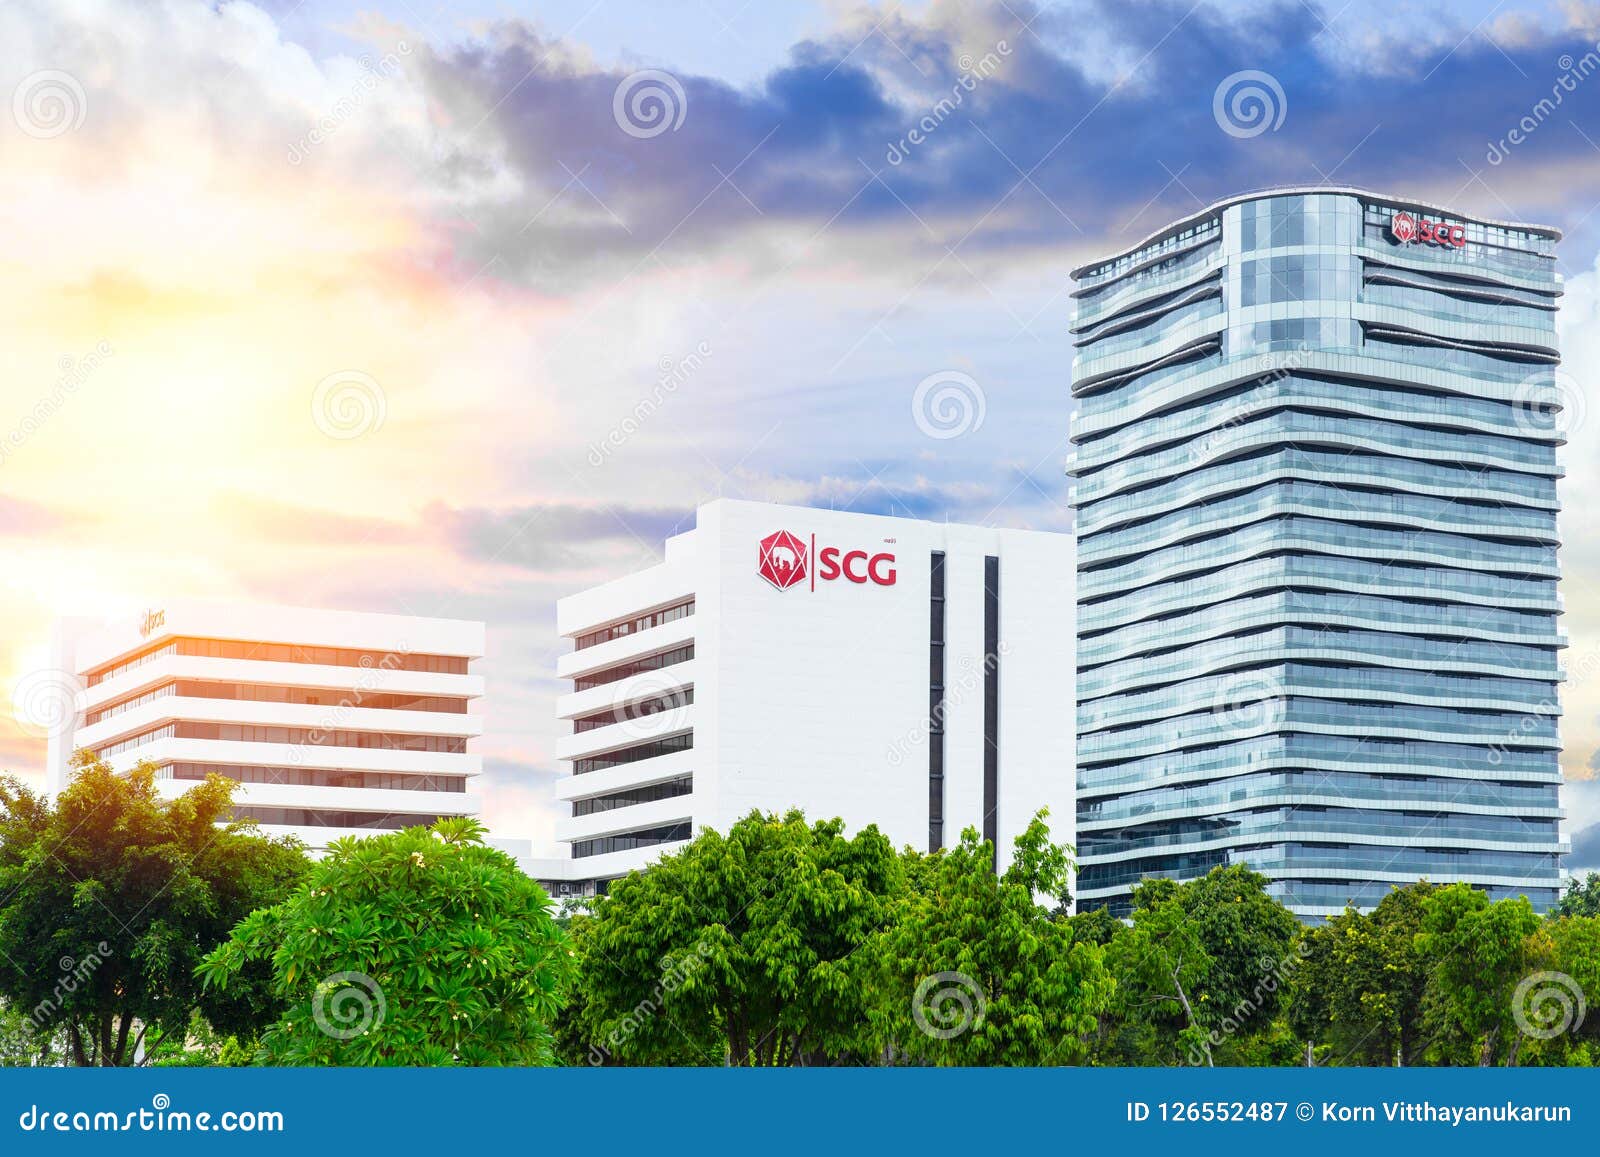 Siam Cement Group SCG Office Building at Bang Sue Editorial Photography